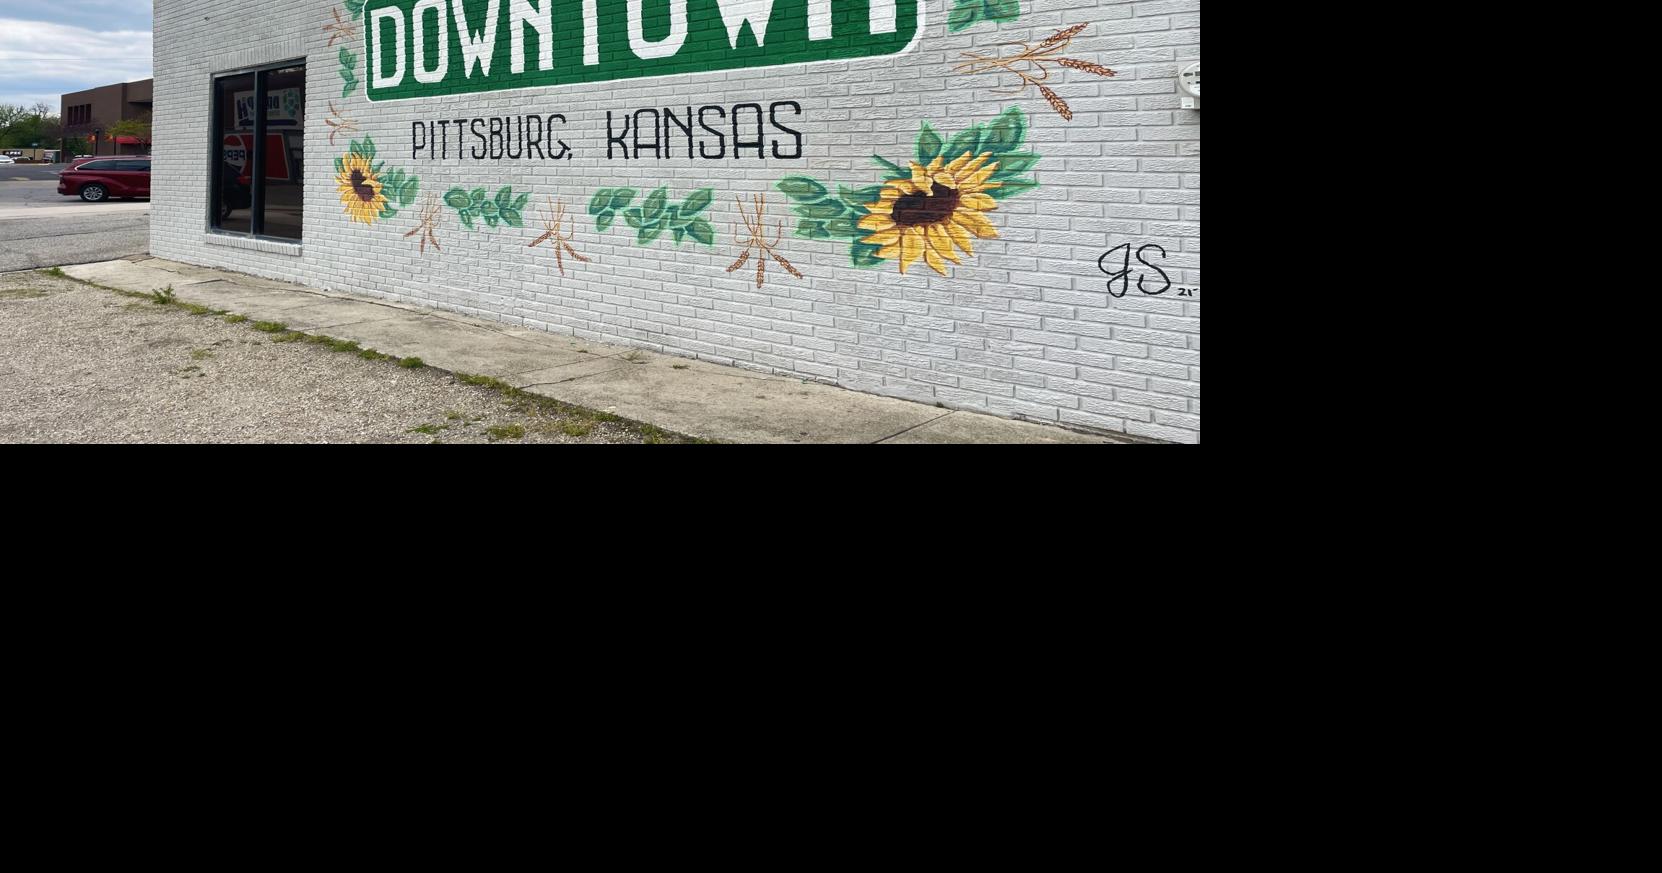 Pittsburg hands out grants for downtown murals